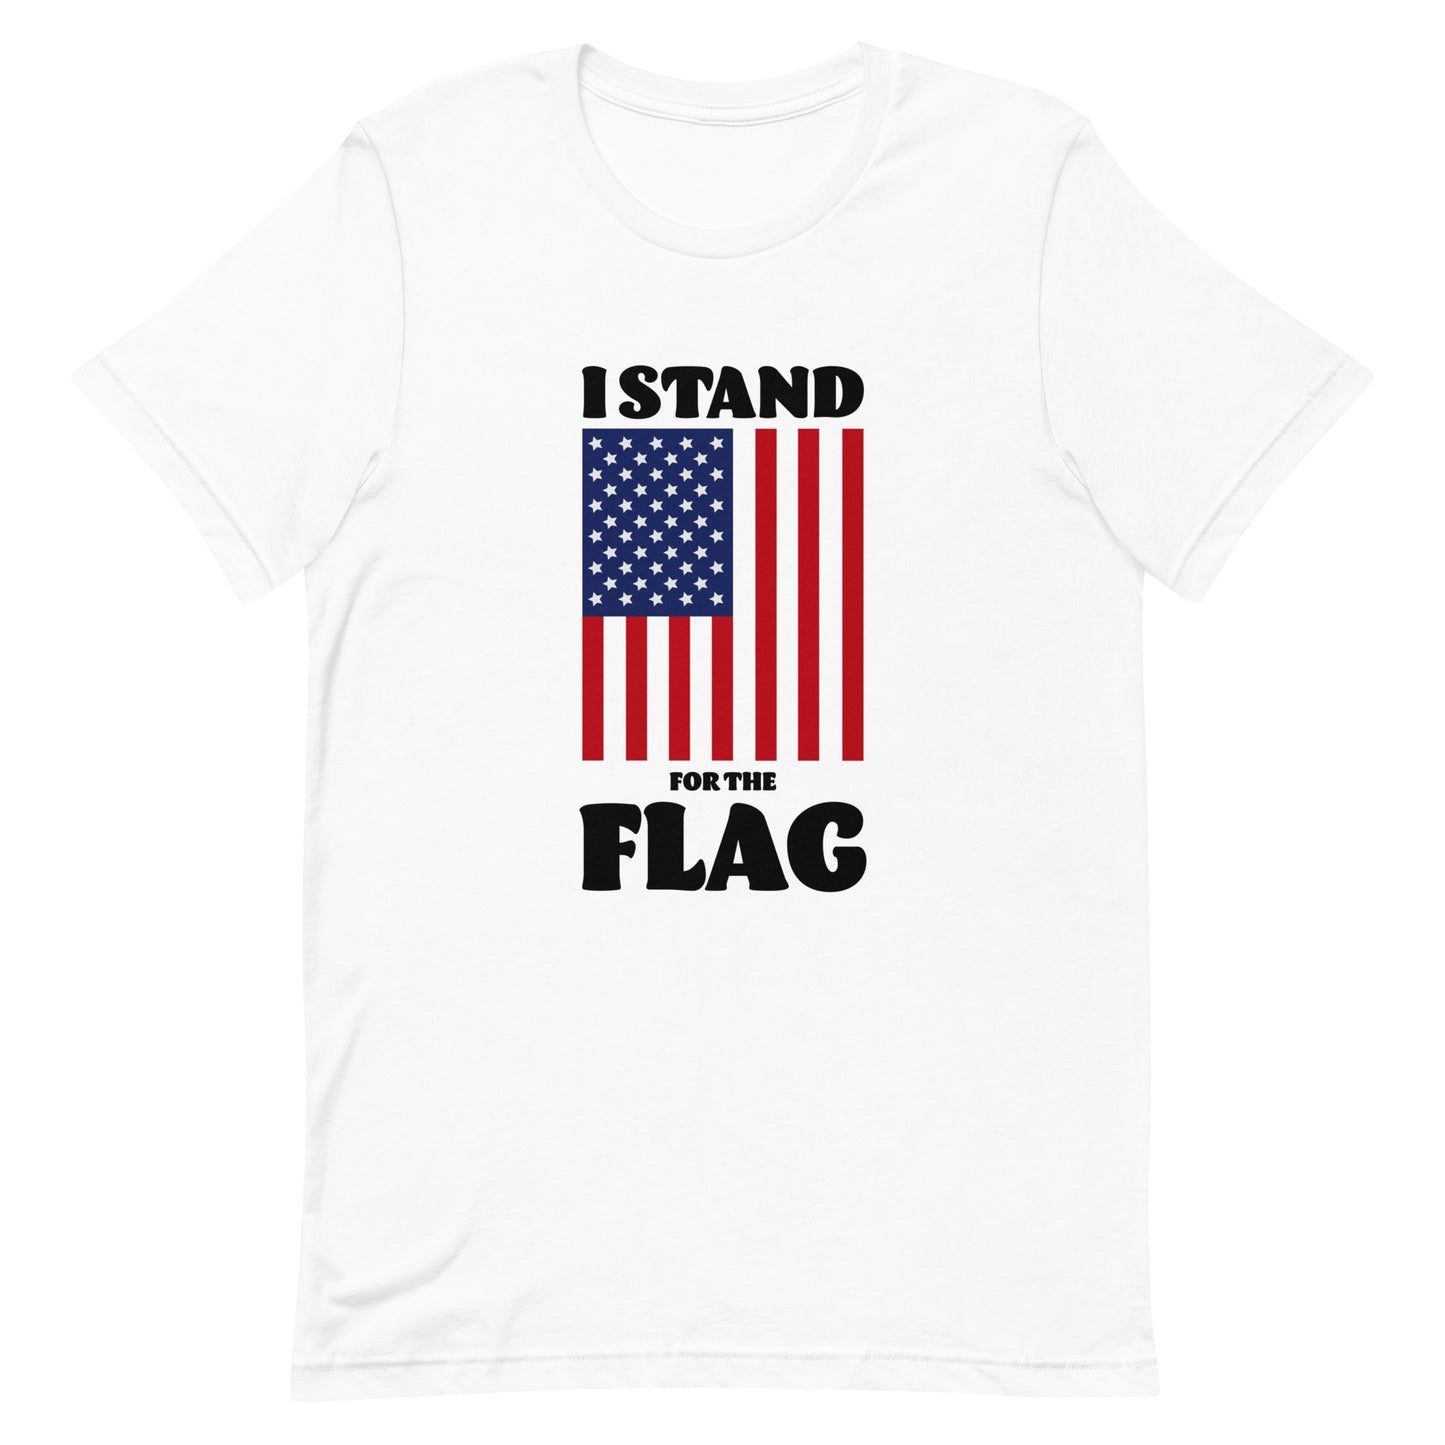 I stand for the Flag T-shirt